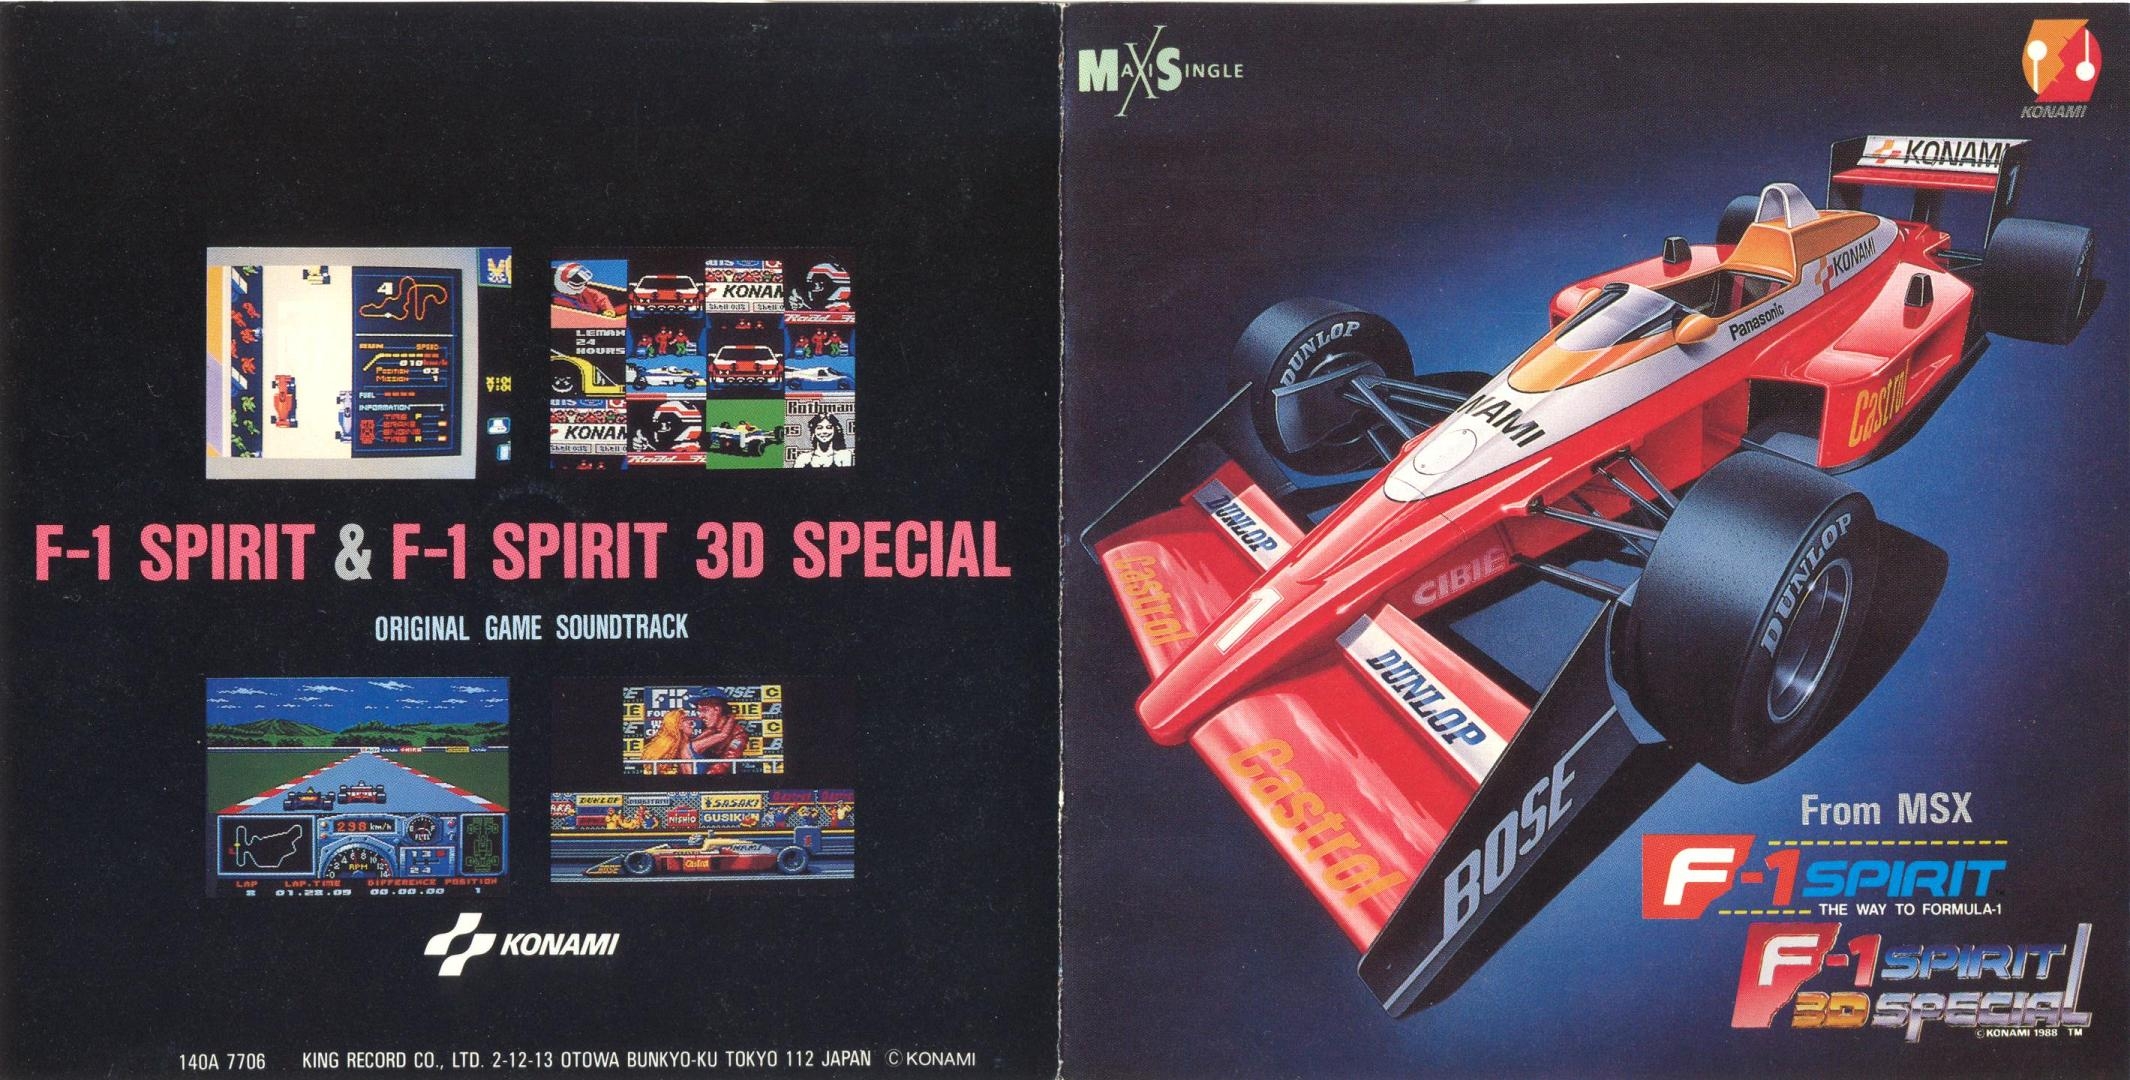 From MSX F-1 Spirit & F-1 Spirit 3D Special (1989) MP3 - Download